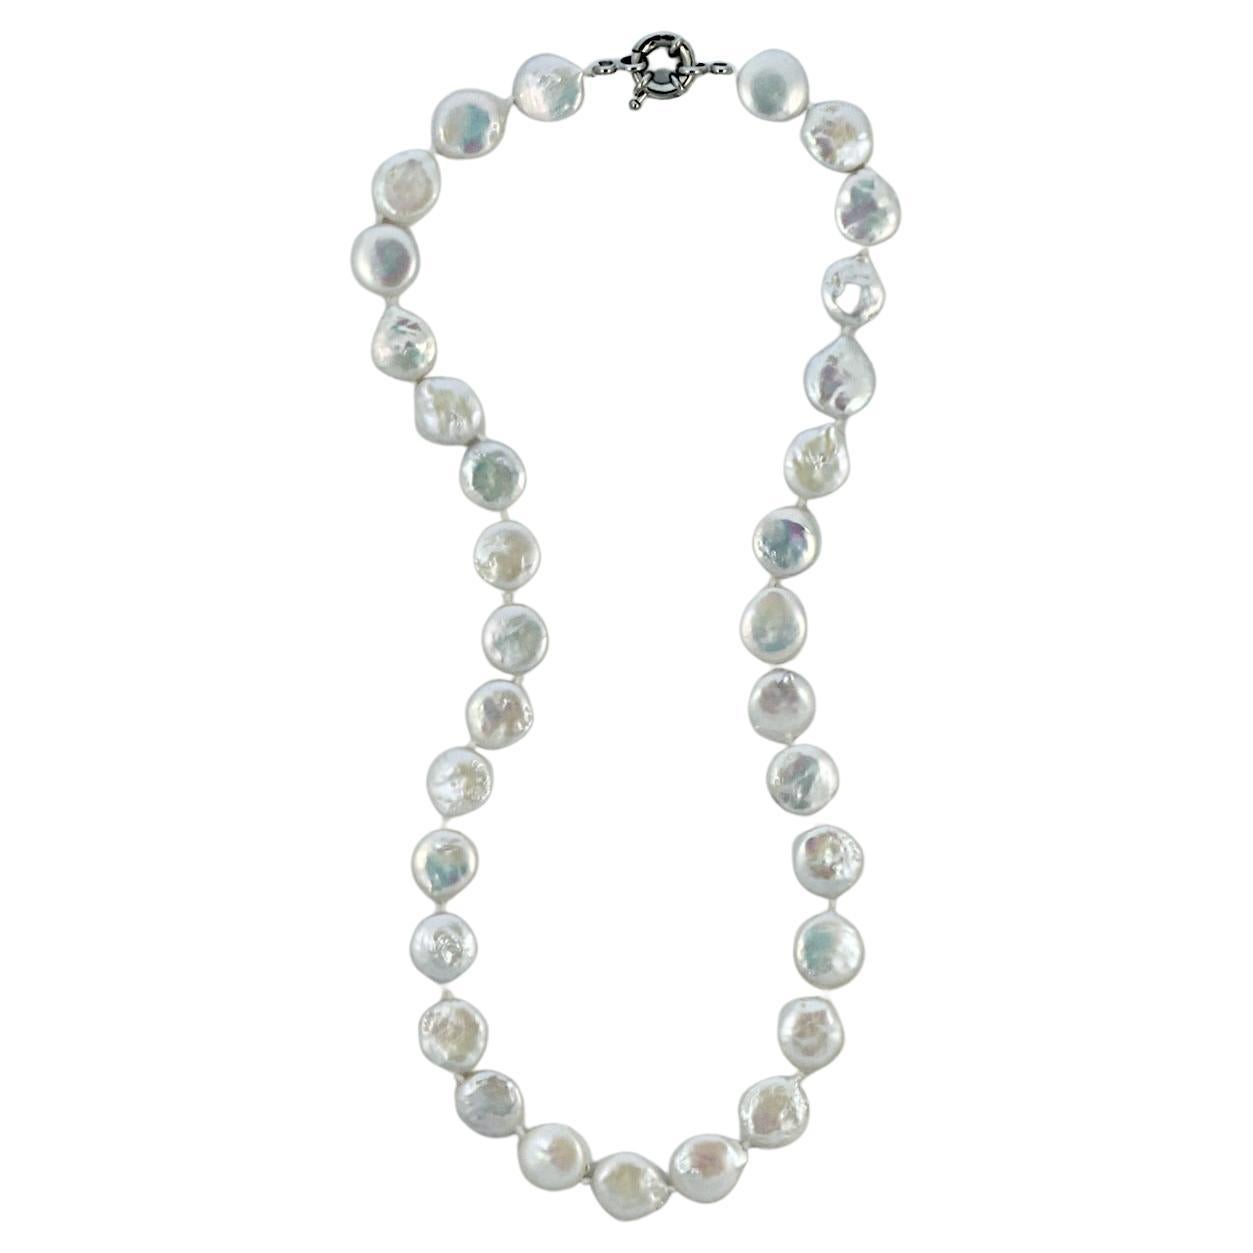 Freshwater Coin Pearl Knotted Necklace with an Iridescent Lustre For Sale